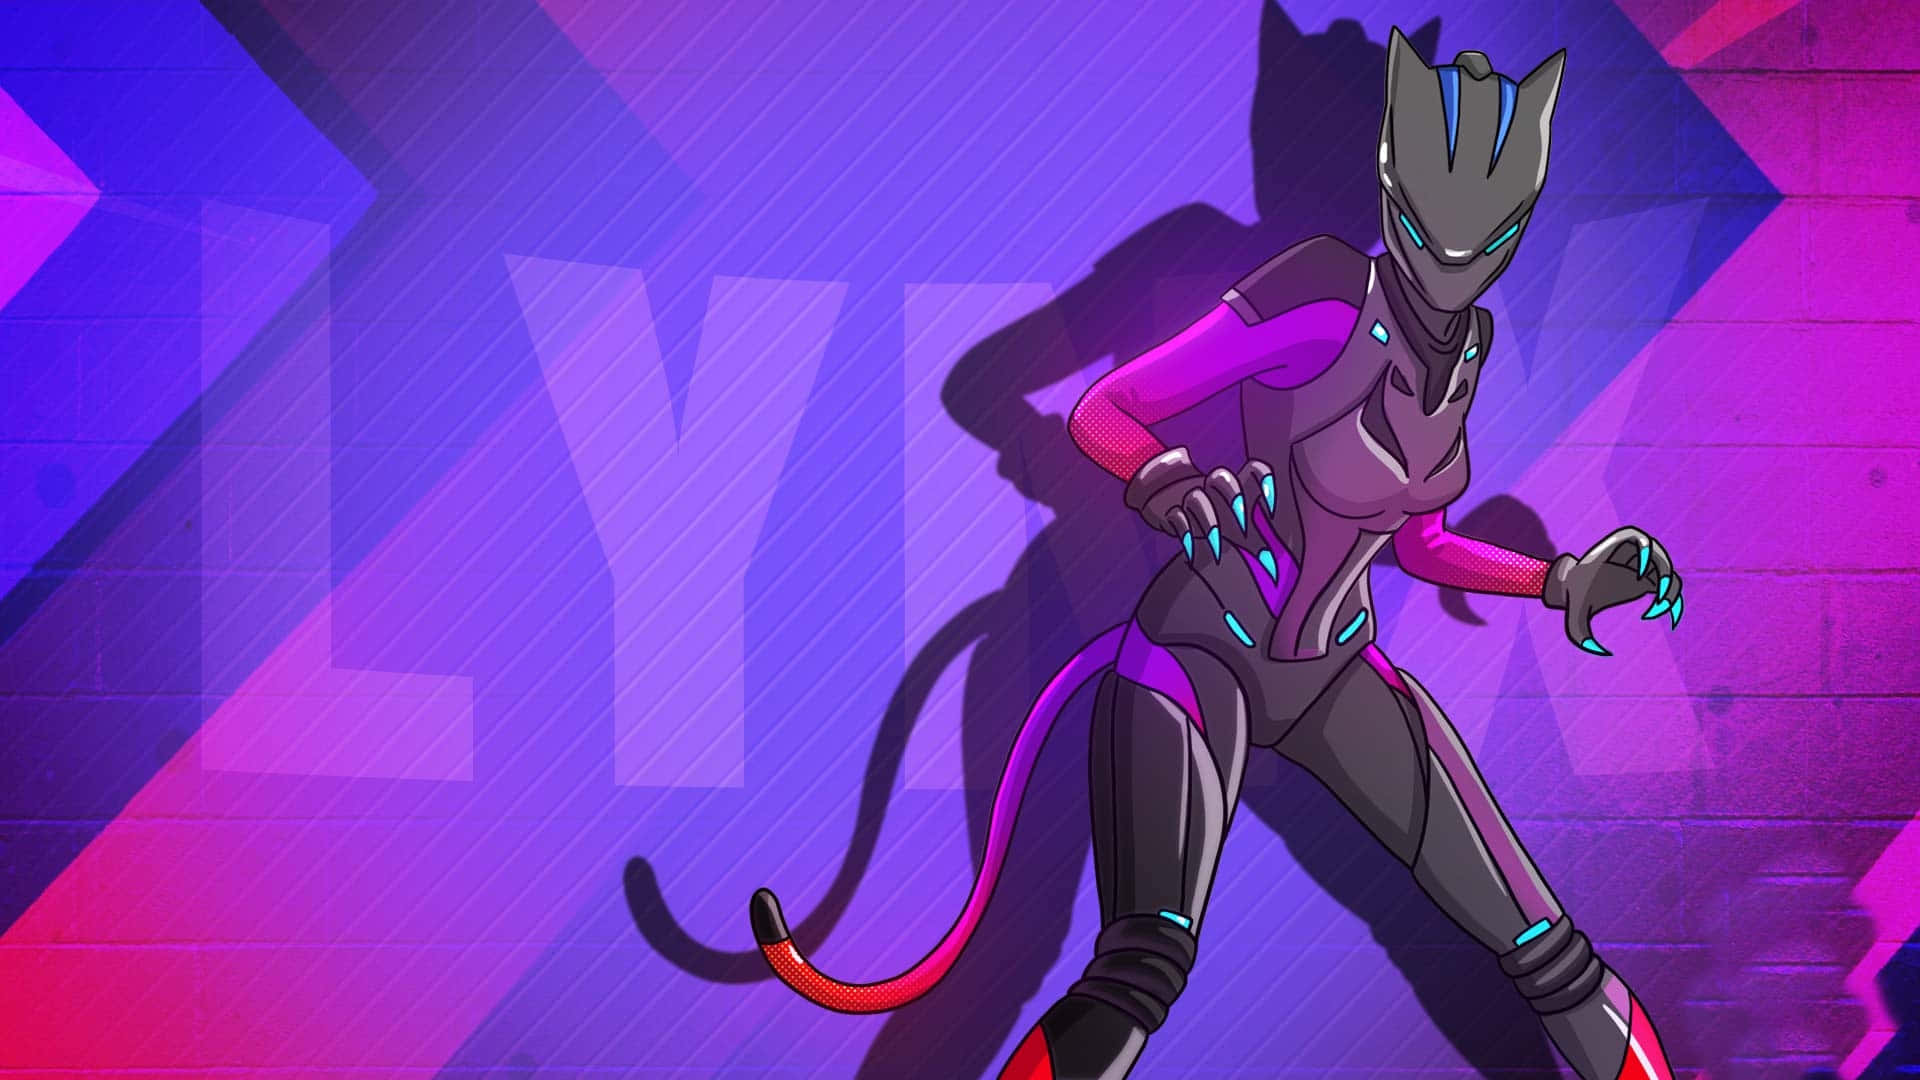 Become a master of the ultimate battle in Lynx Fortnite Wallpaper